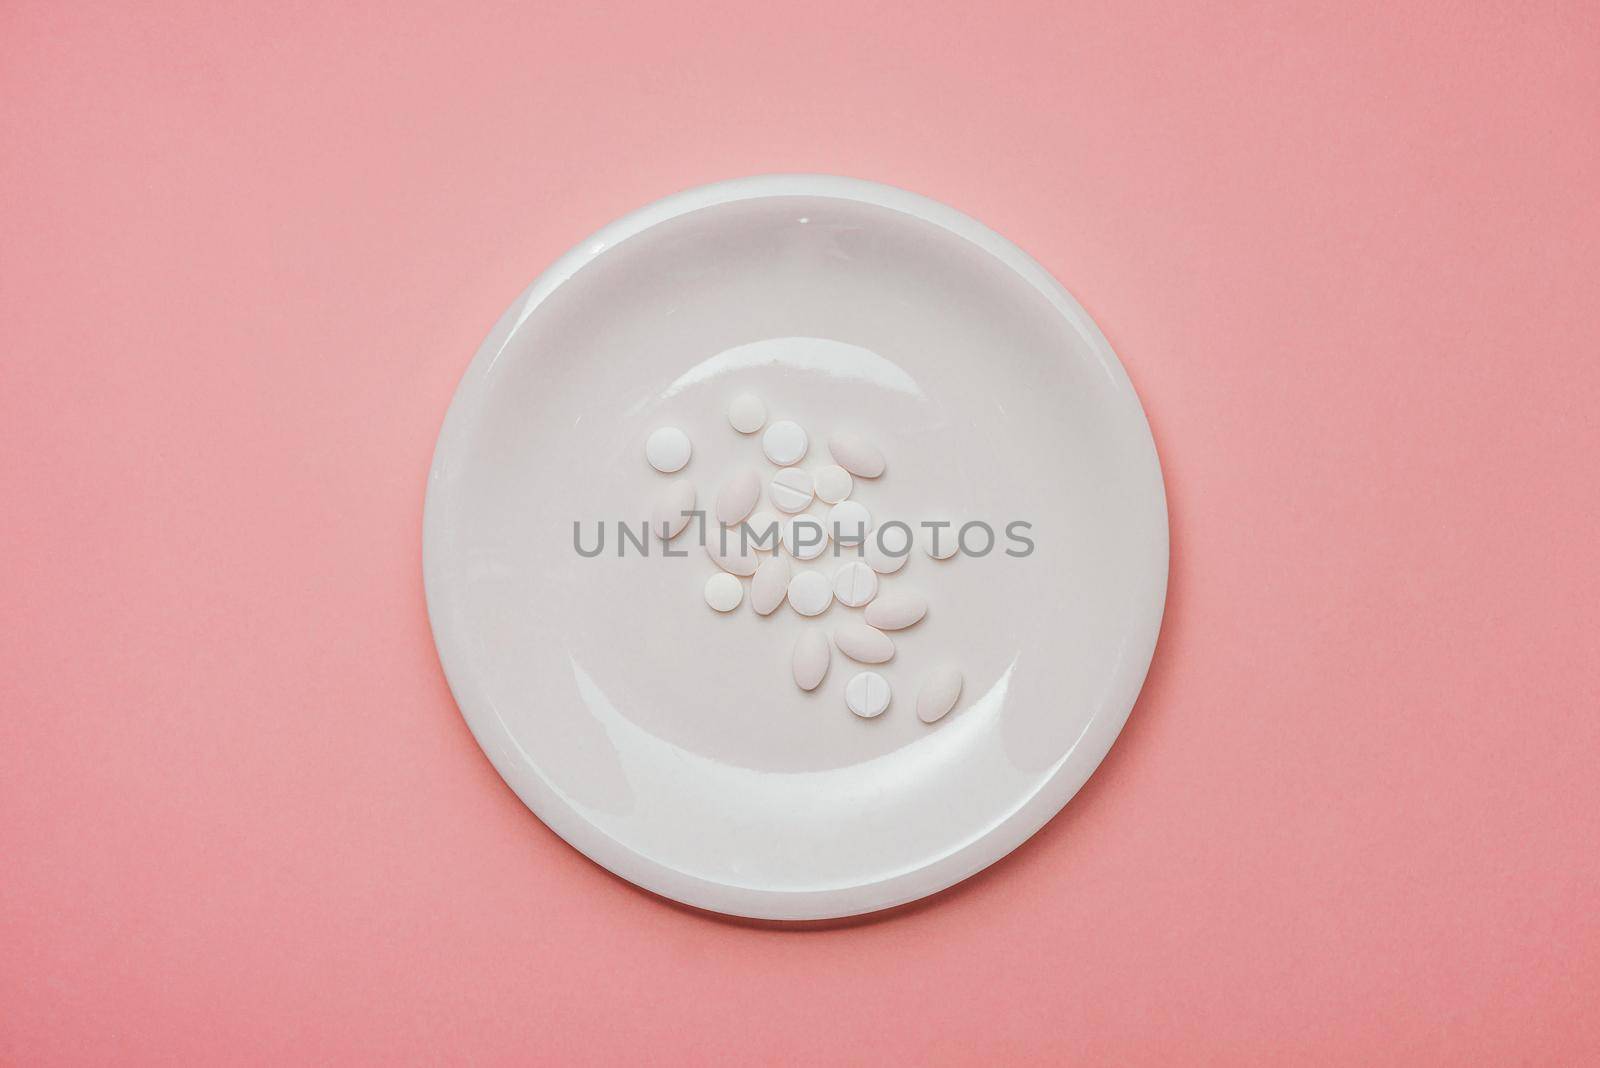 Pills served as a healthy meal. Drug capsule on white plate on pink background by makidotvn